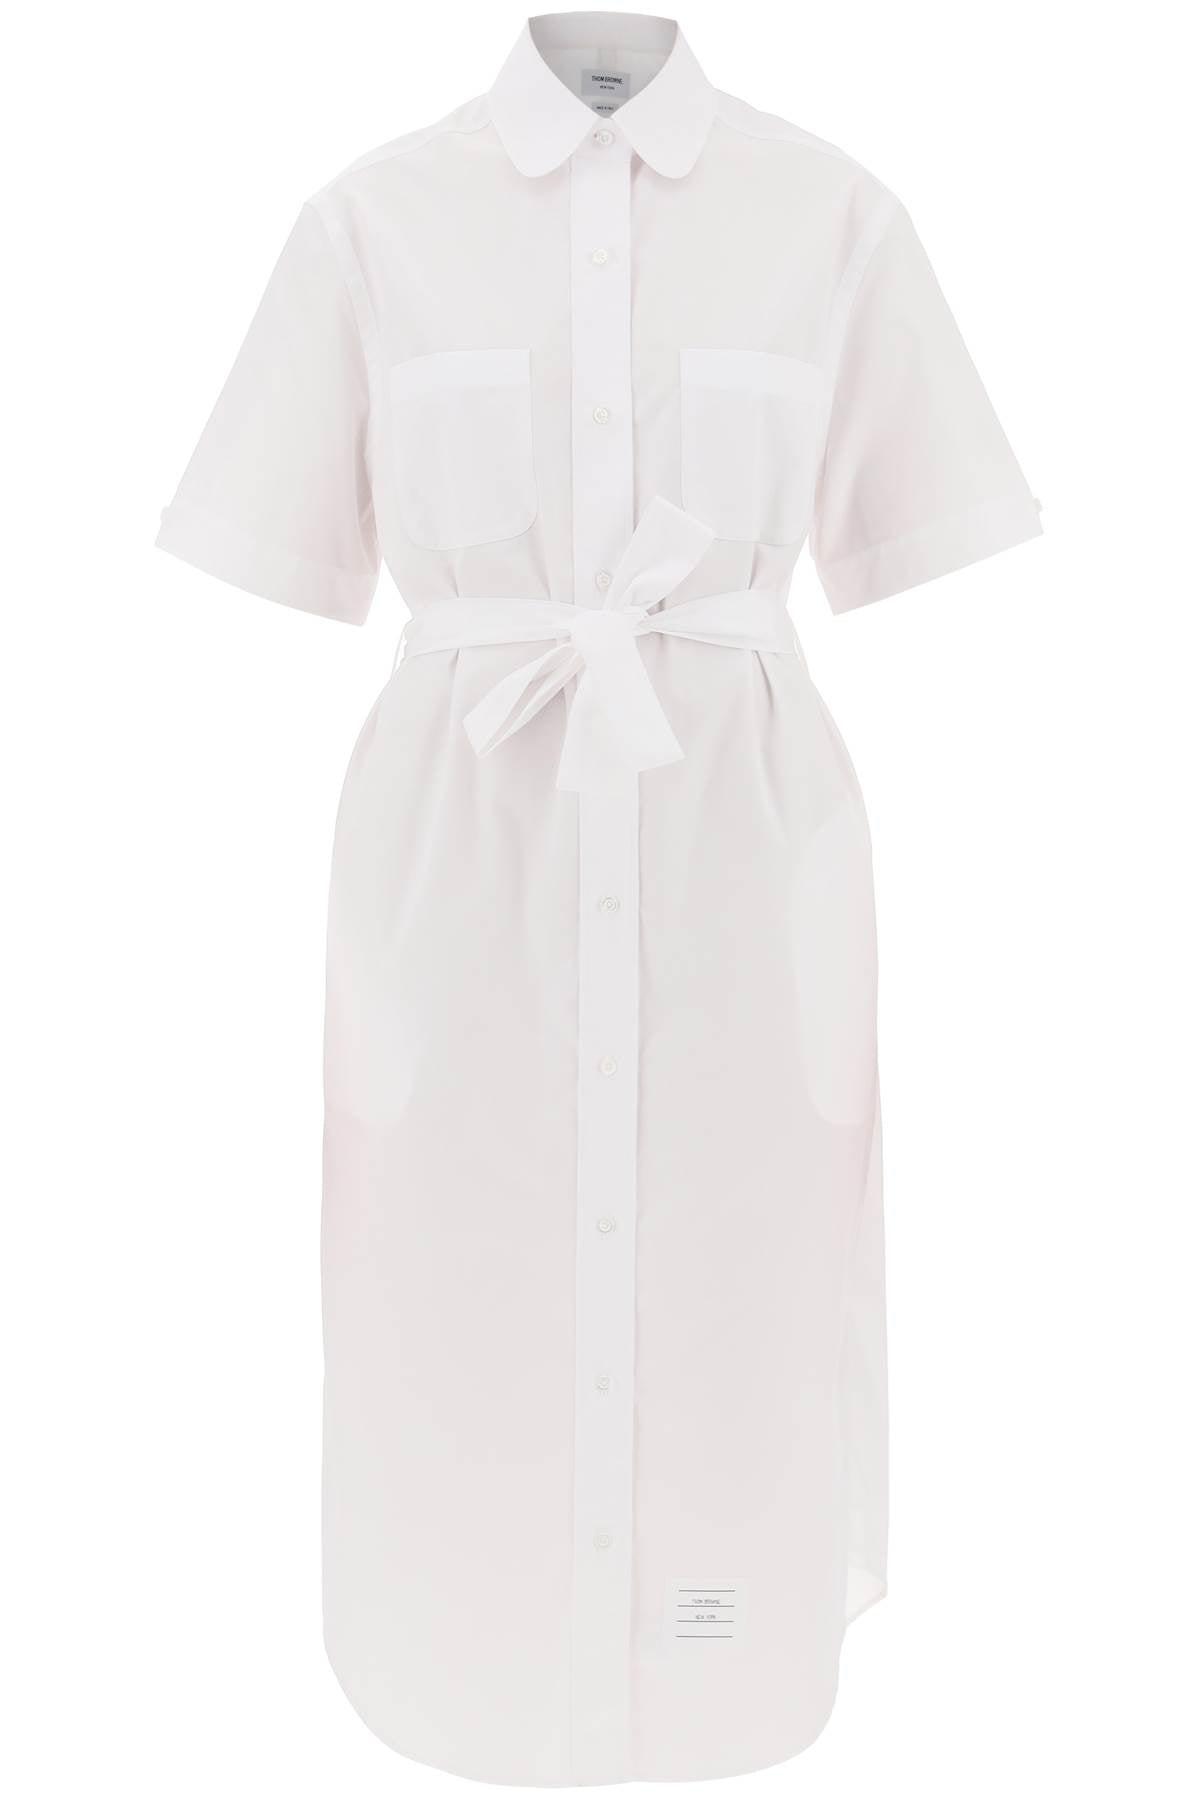 THOM BROWNE White Cotton Midi Blouse with Belt for Women - FW24 Collection